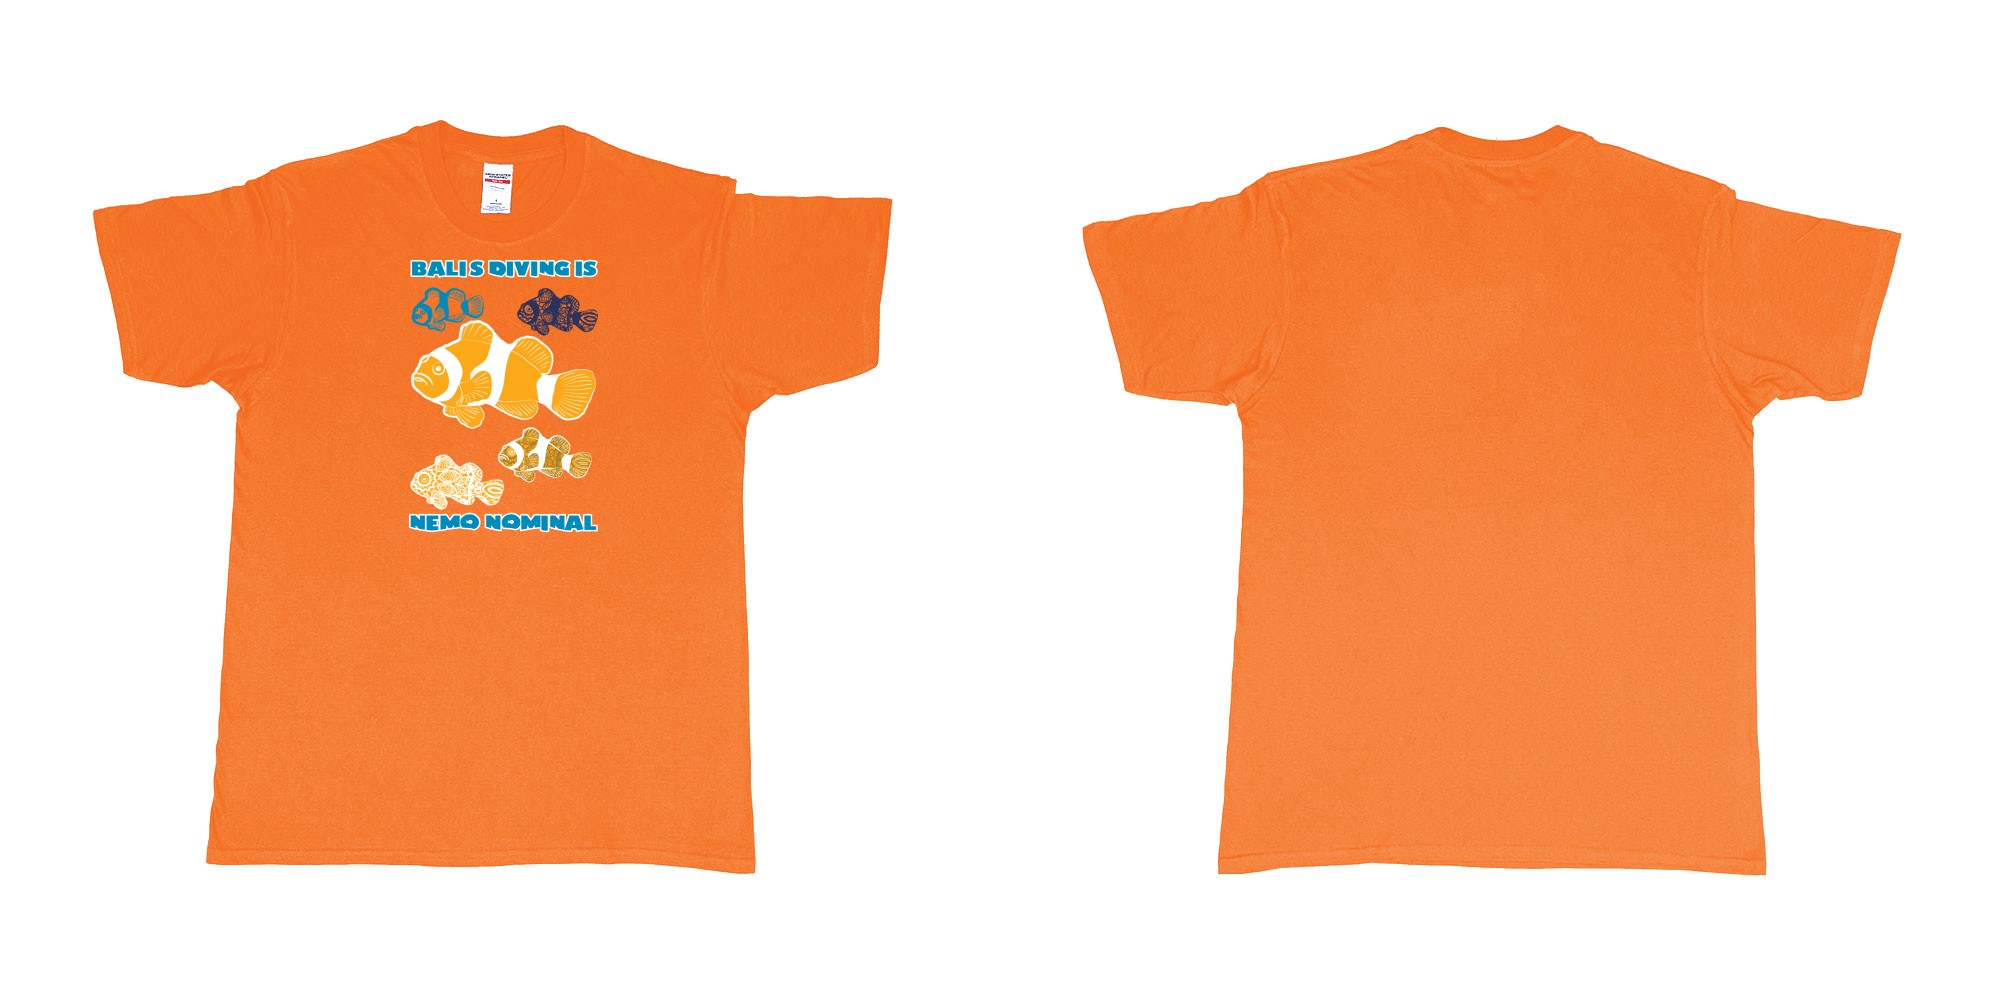 Custom tshirt design bali diving is nemo nominal in fabric color orange choice your own text made in Bali by The Pirate Way